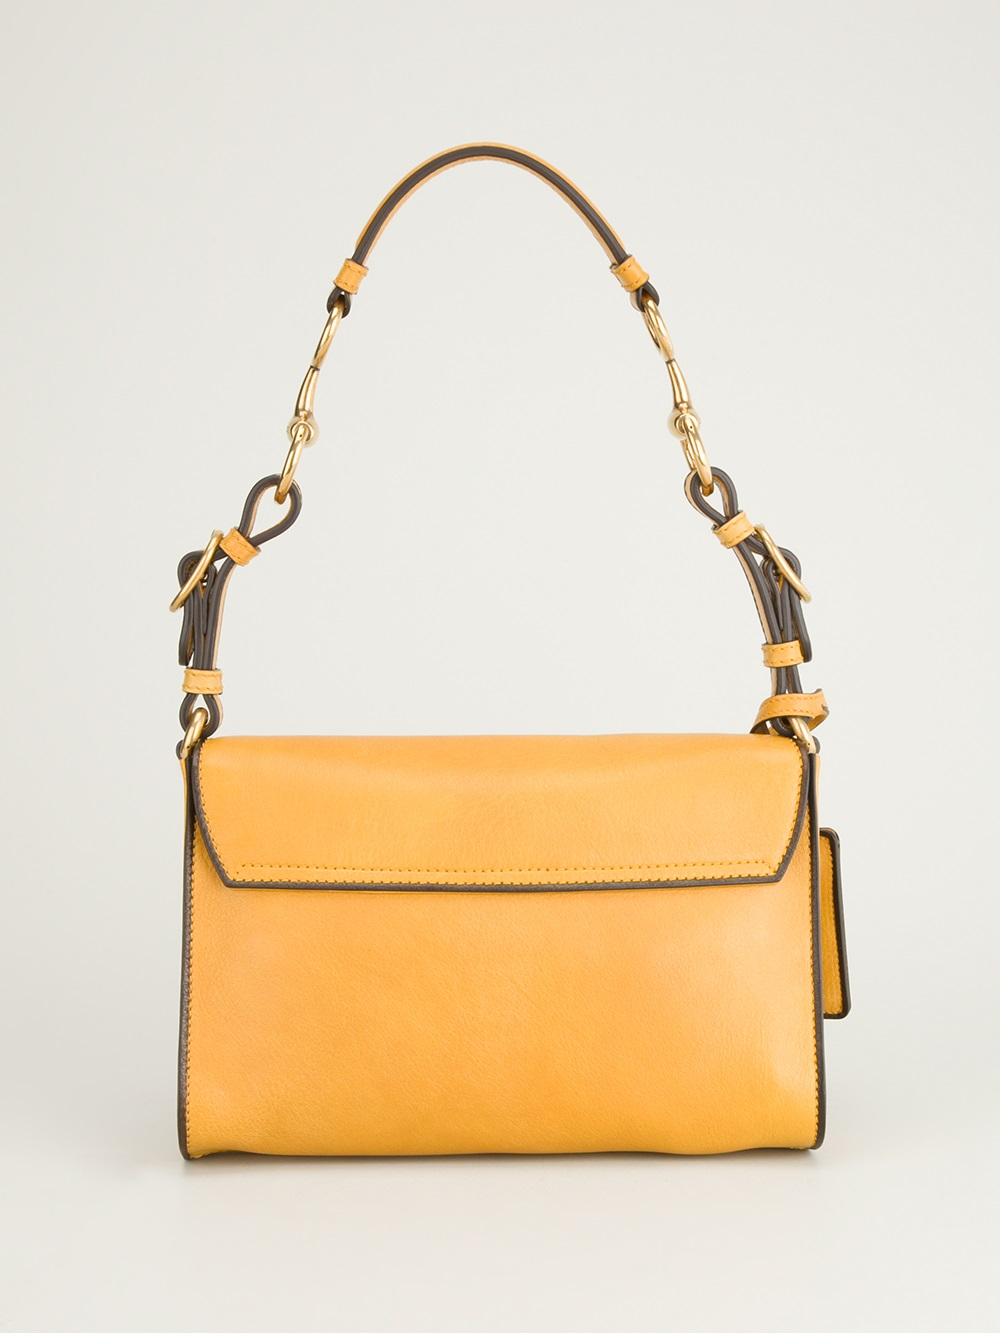 Lyst - Gucci Flap Fastening Shoulder Bag in Yellow